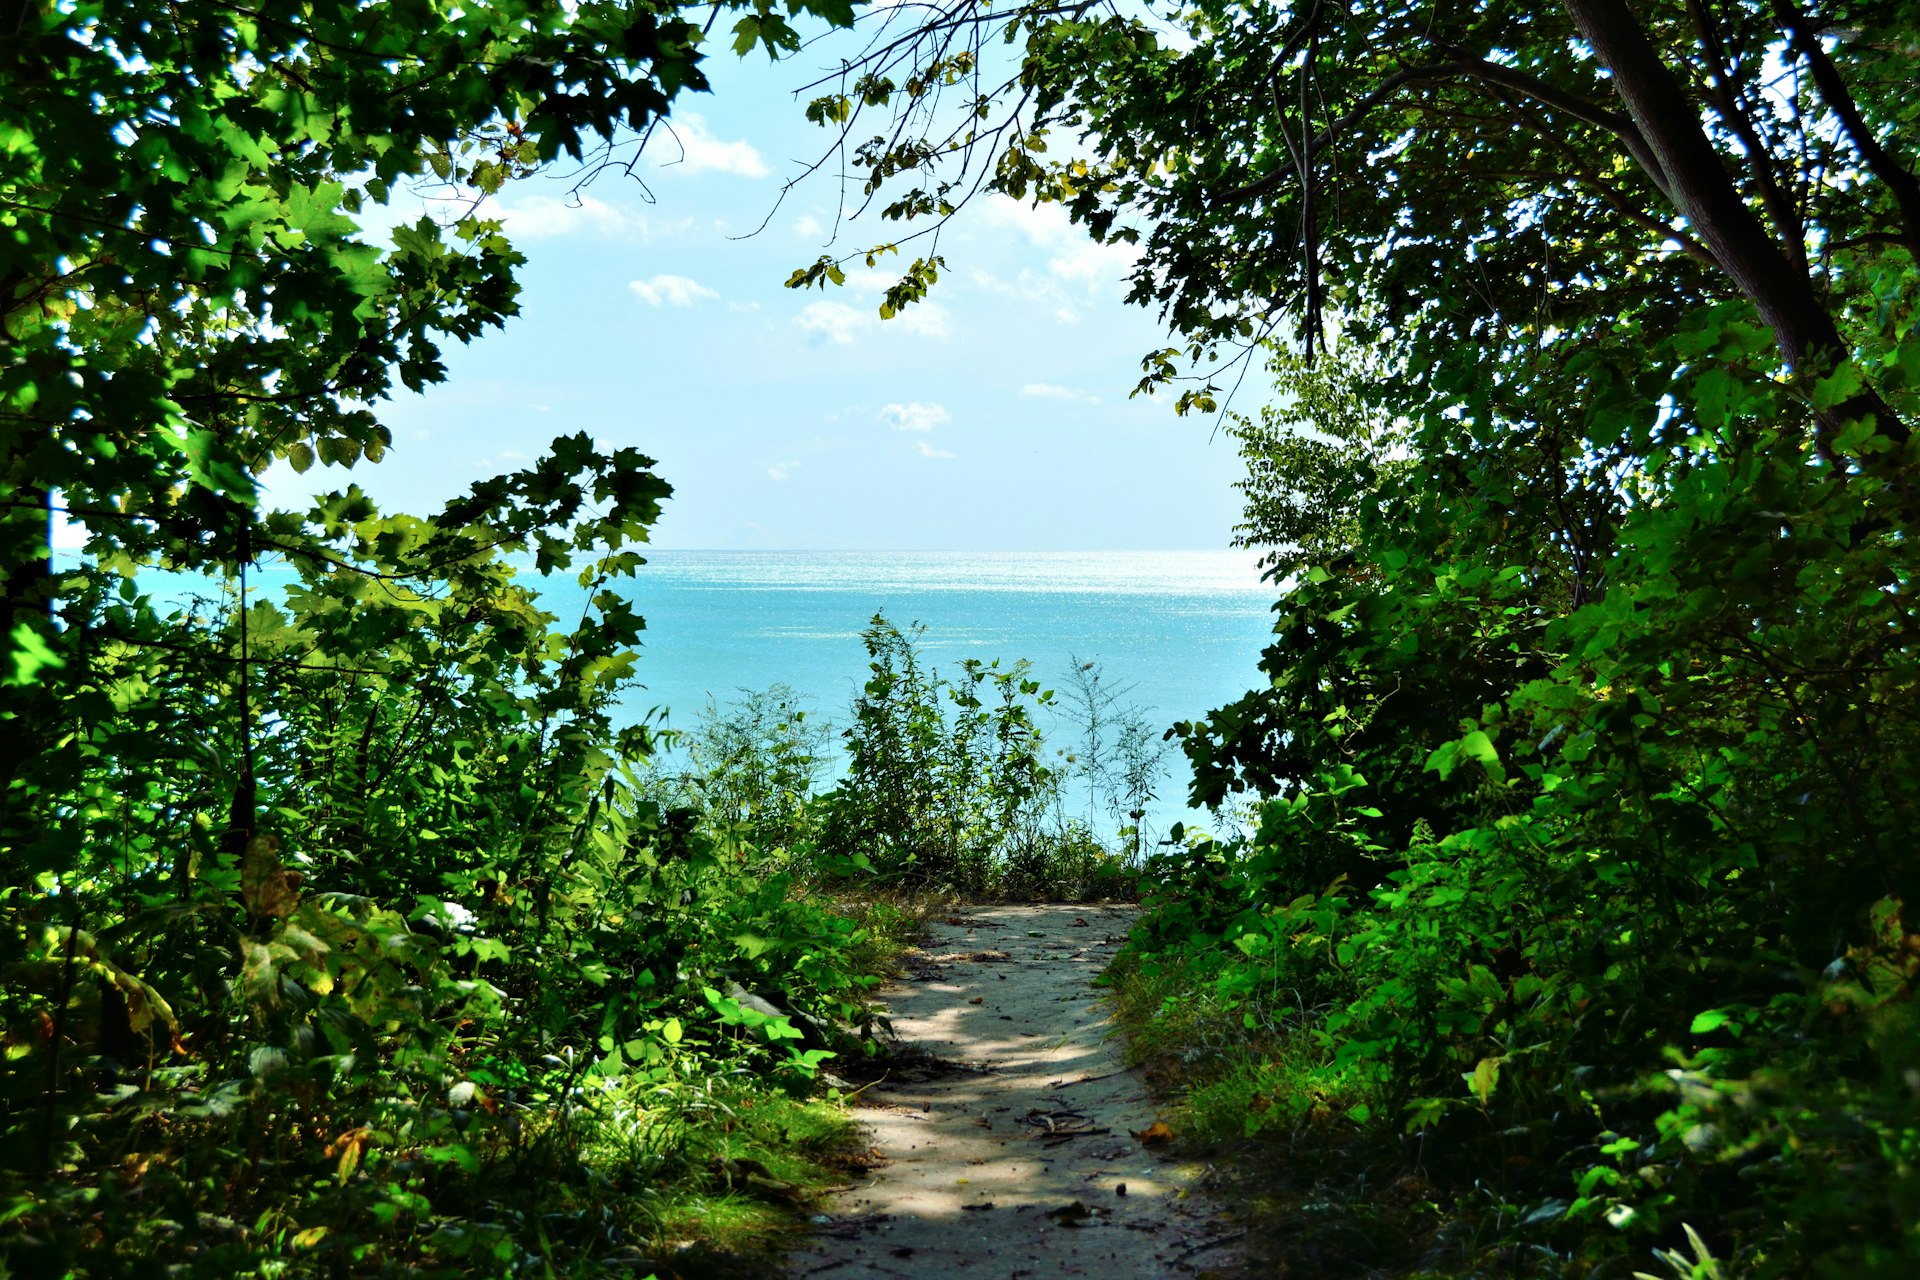 A narrow dusty pathway leads through bushes to a clifftop. A body of water is in the distance